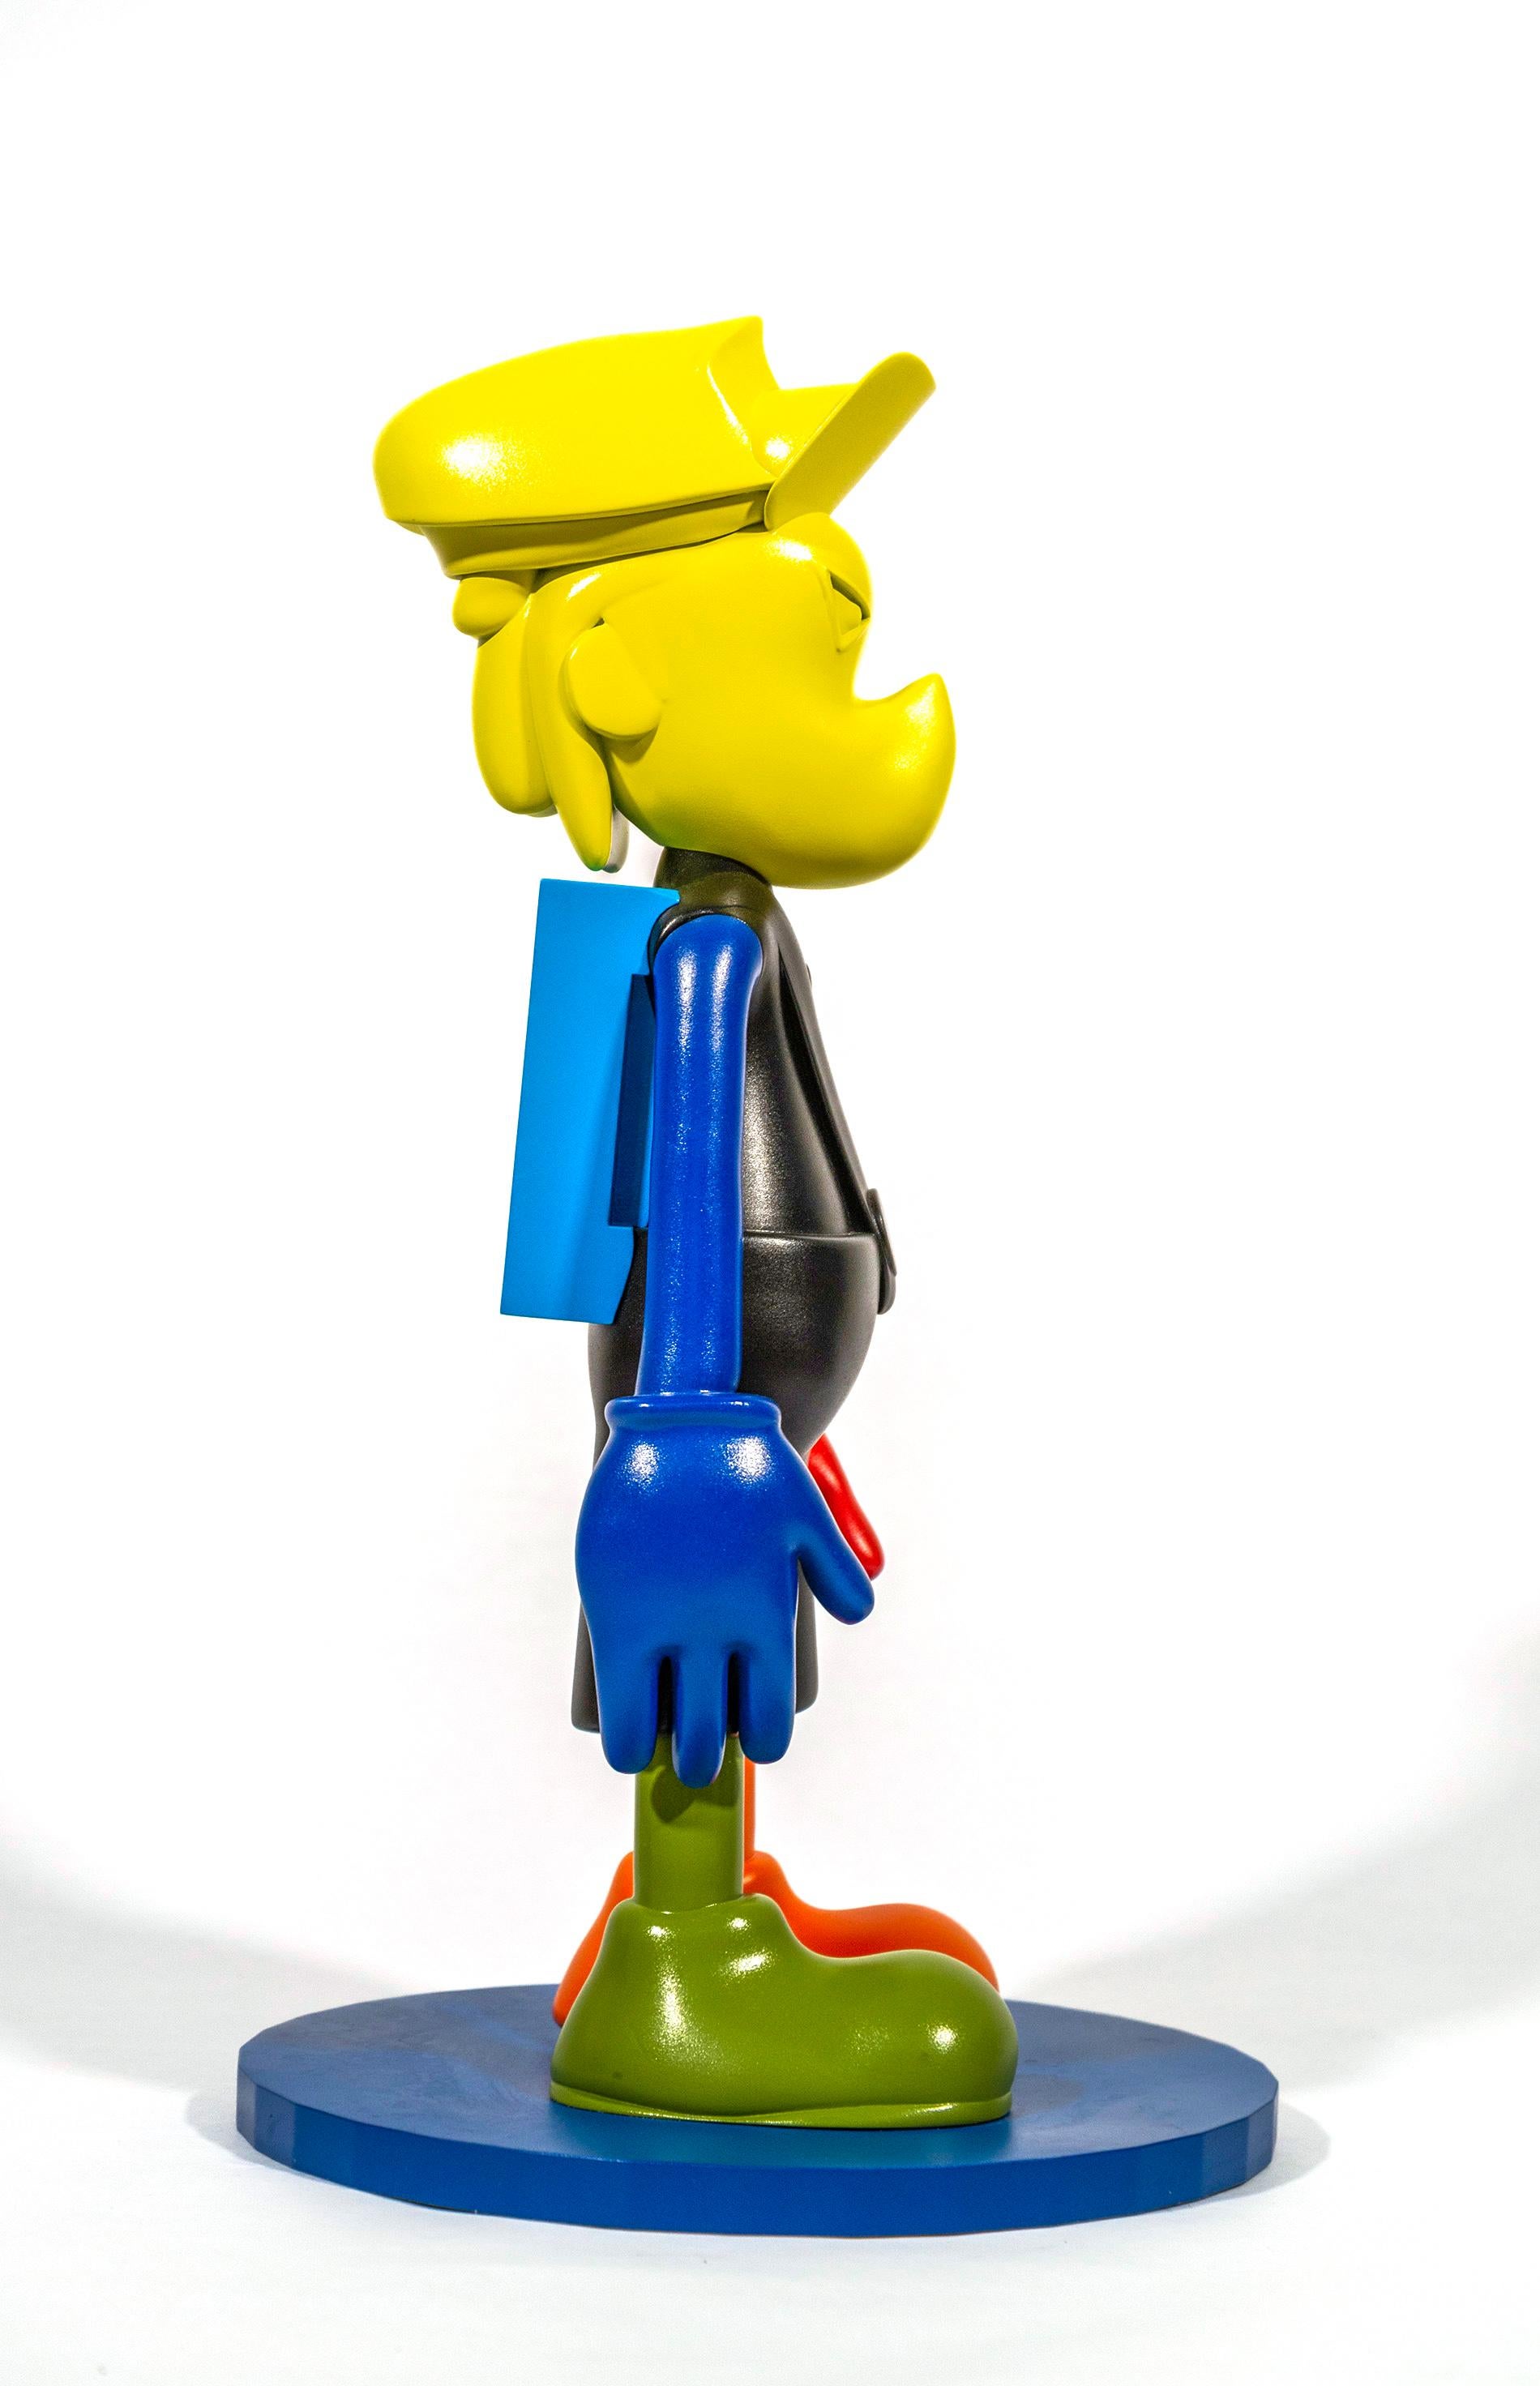 Playful, colourful and imaginative, Viktor Mitic’s latest series of sculptures appear to merge pop art with science fiction. The colour palette of green, black, yellow and orange combines into a fun, bright and contemporary collectible. These 3-D